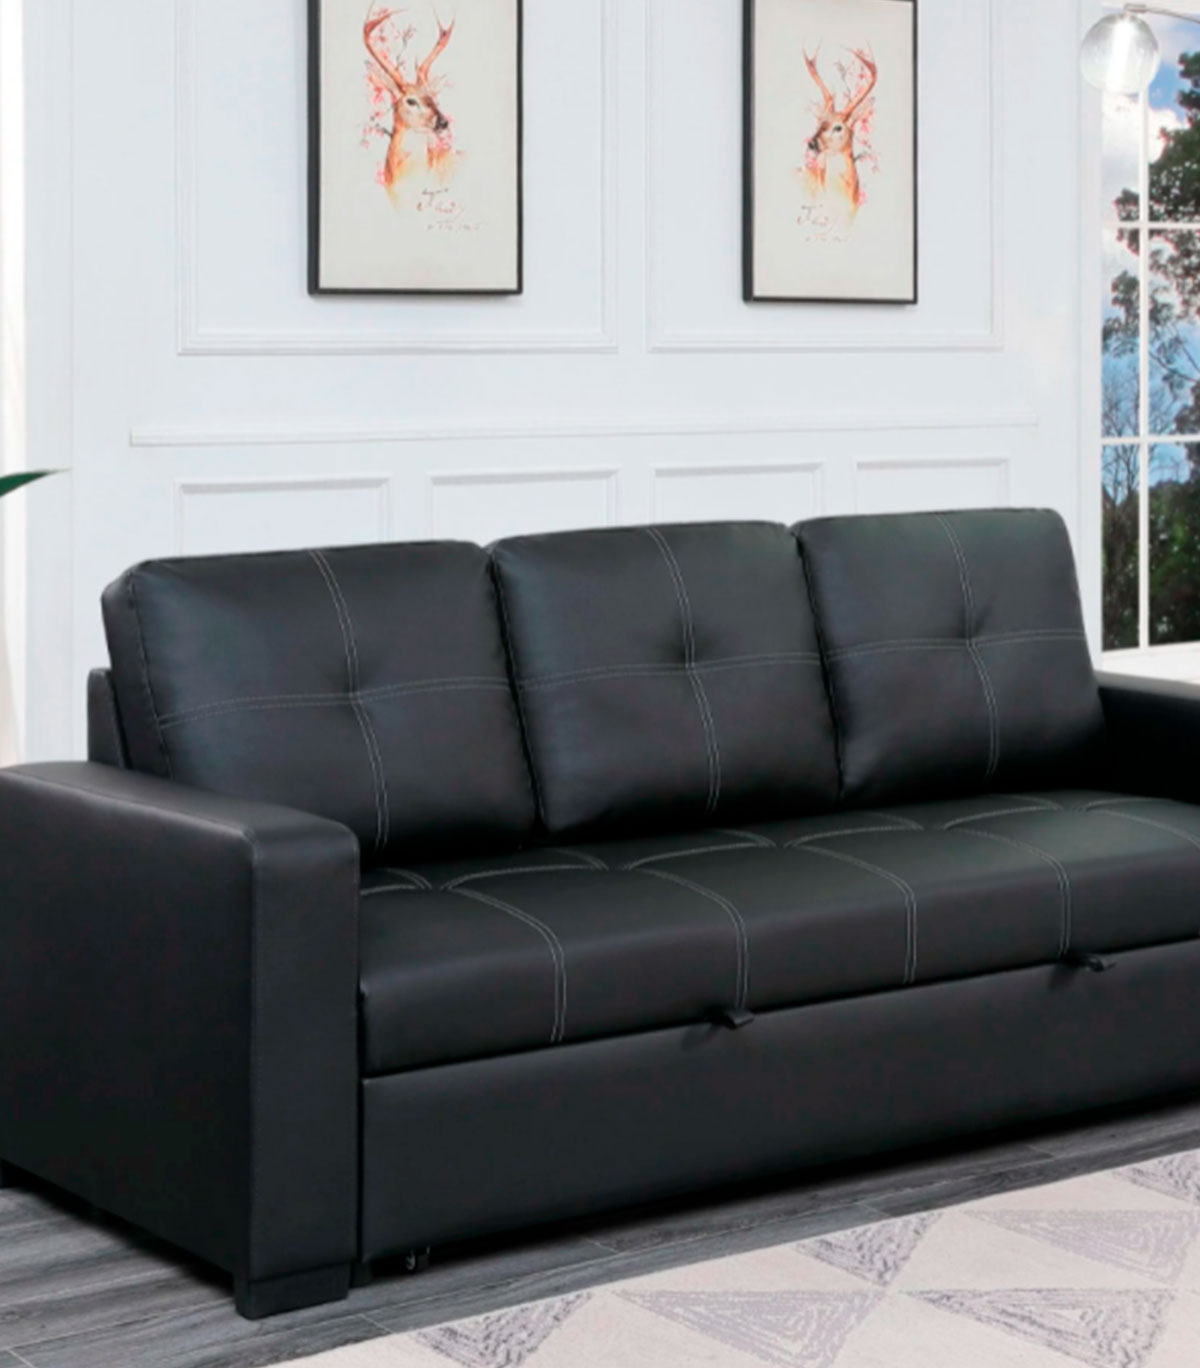 PULL OUT DARK BROWN SOFA